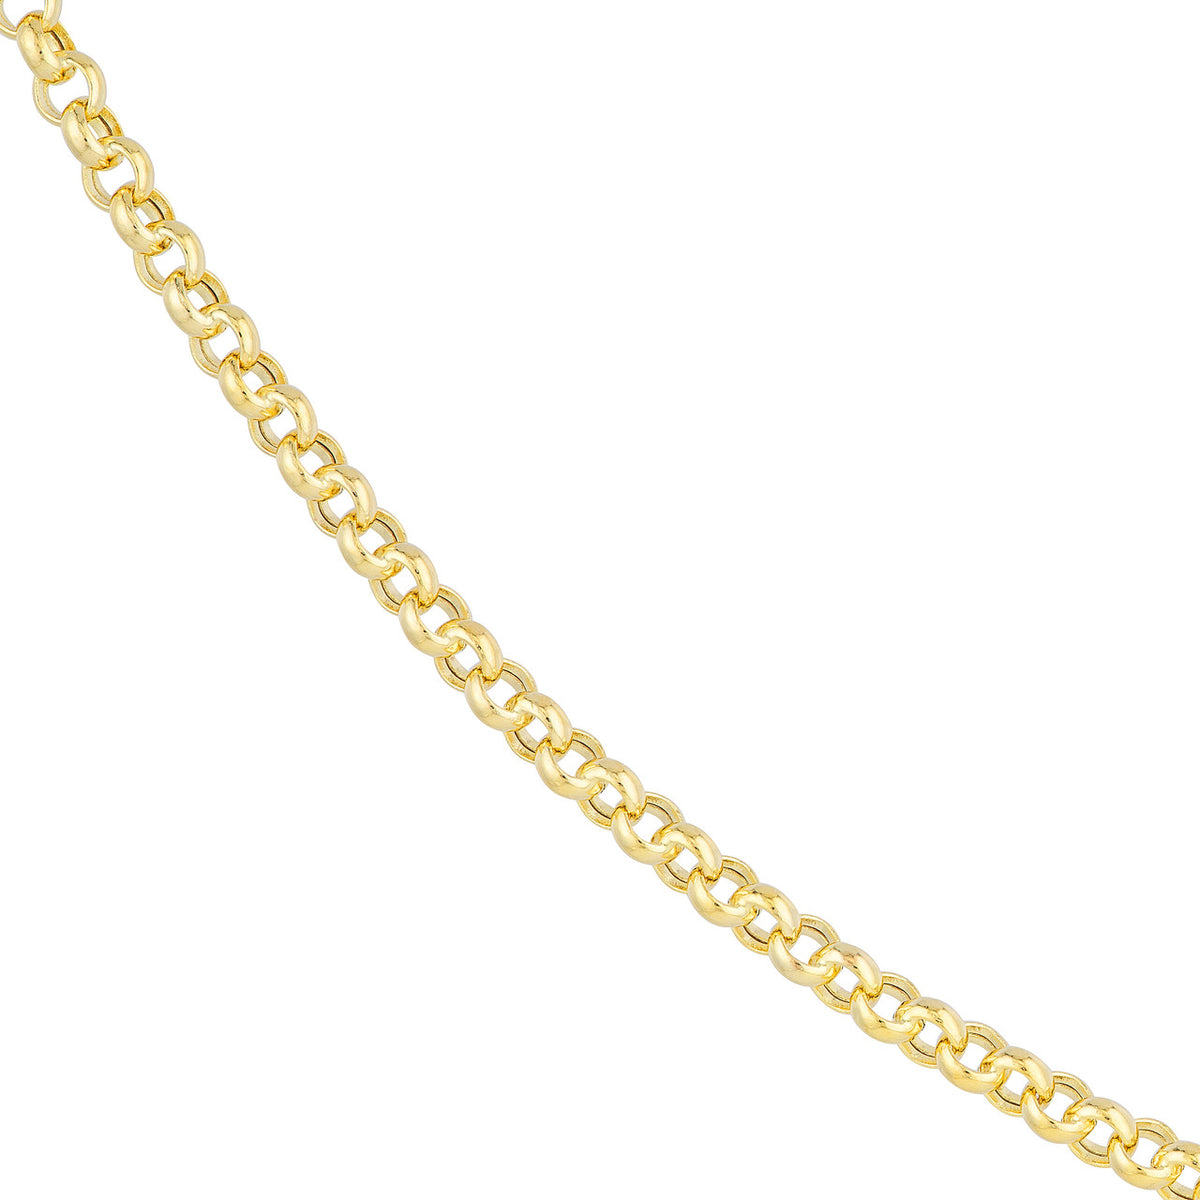 14K Yellow Gold 5.2mm Rolo Chain Necklace with Pear Lobster Lock